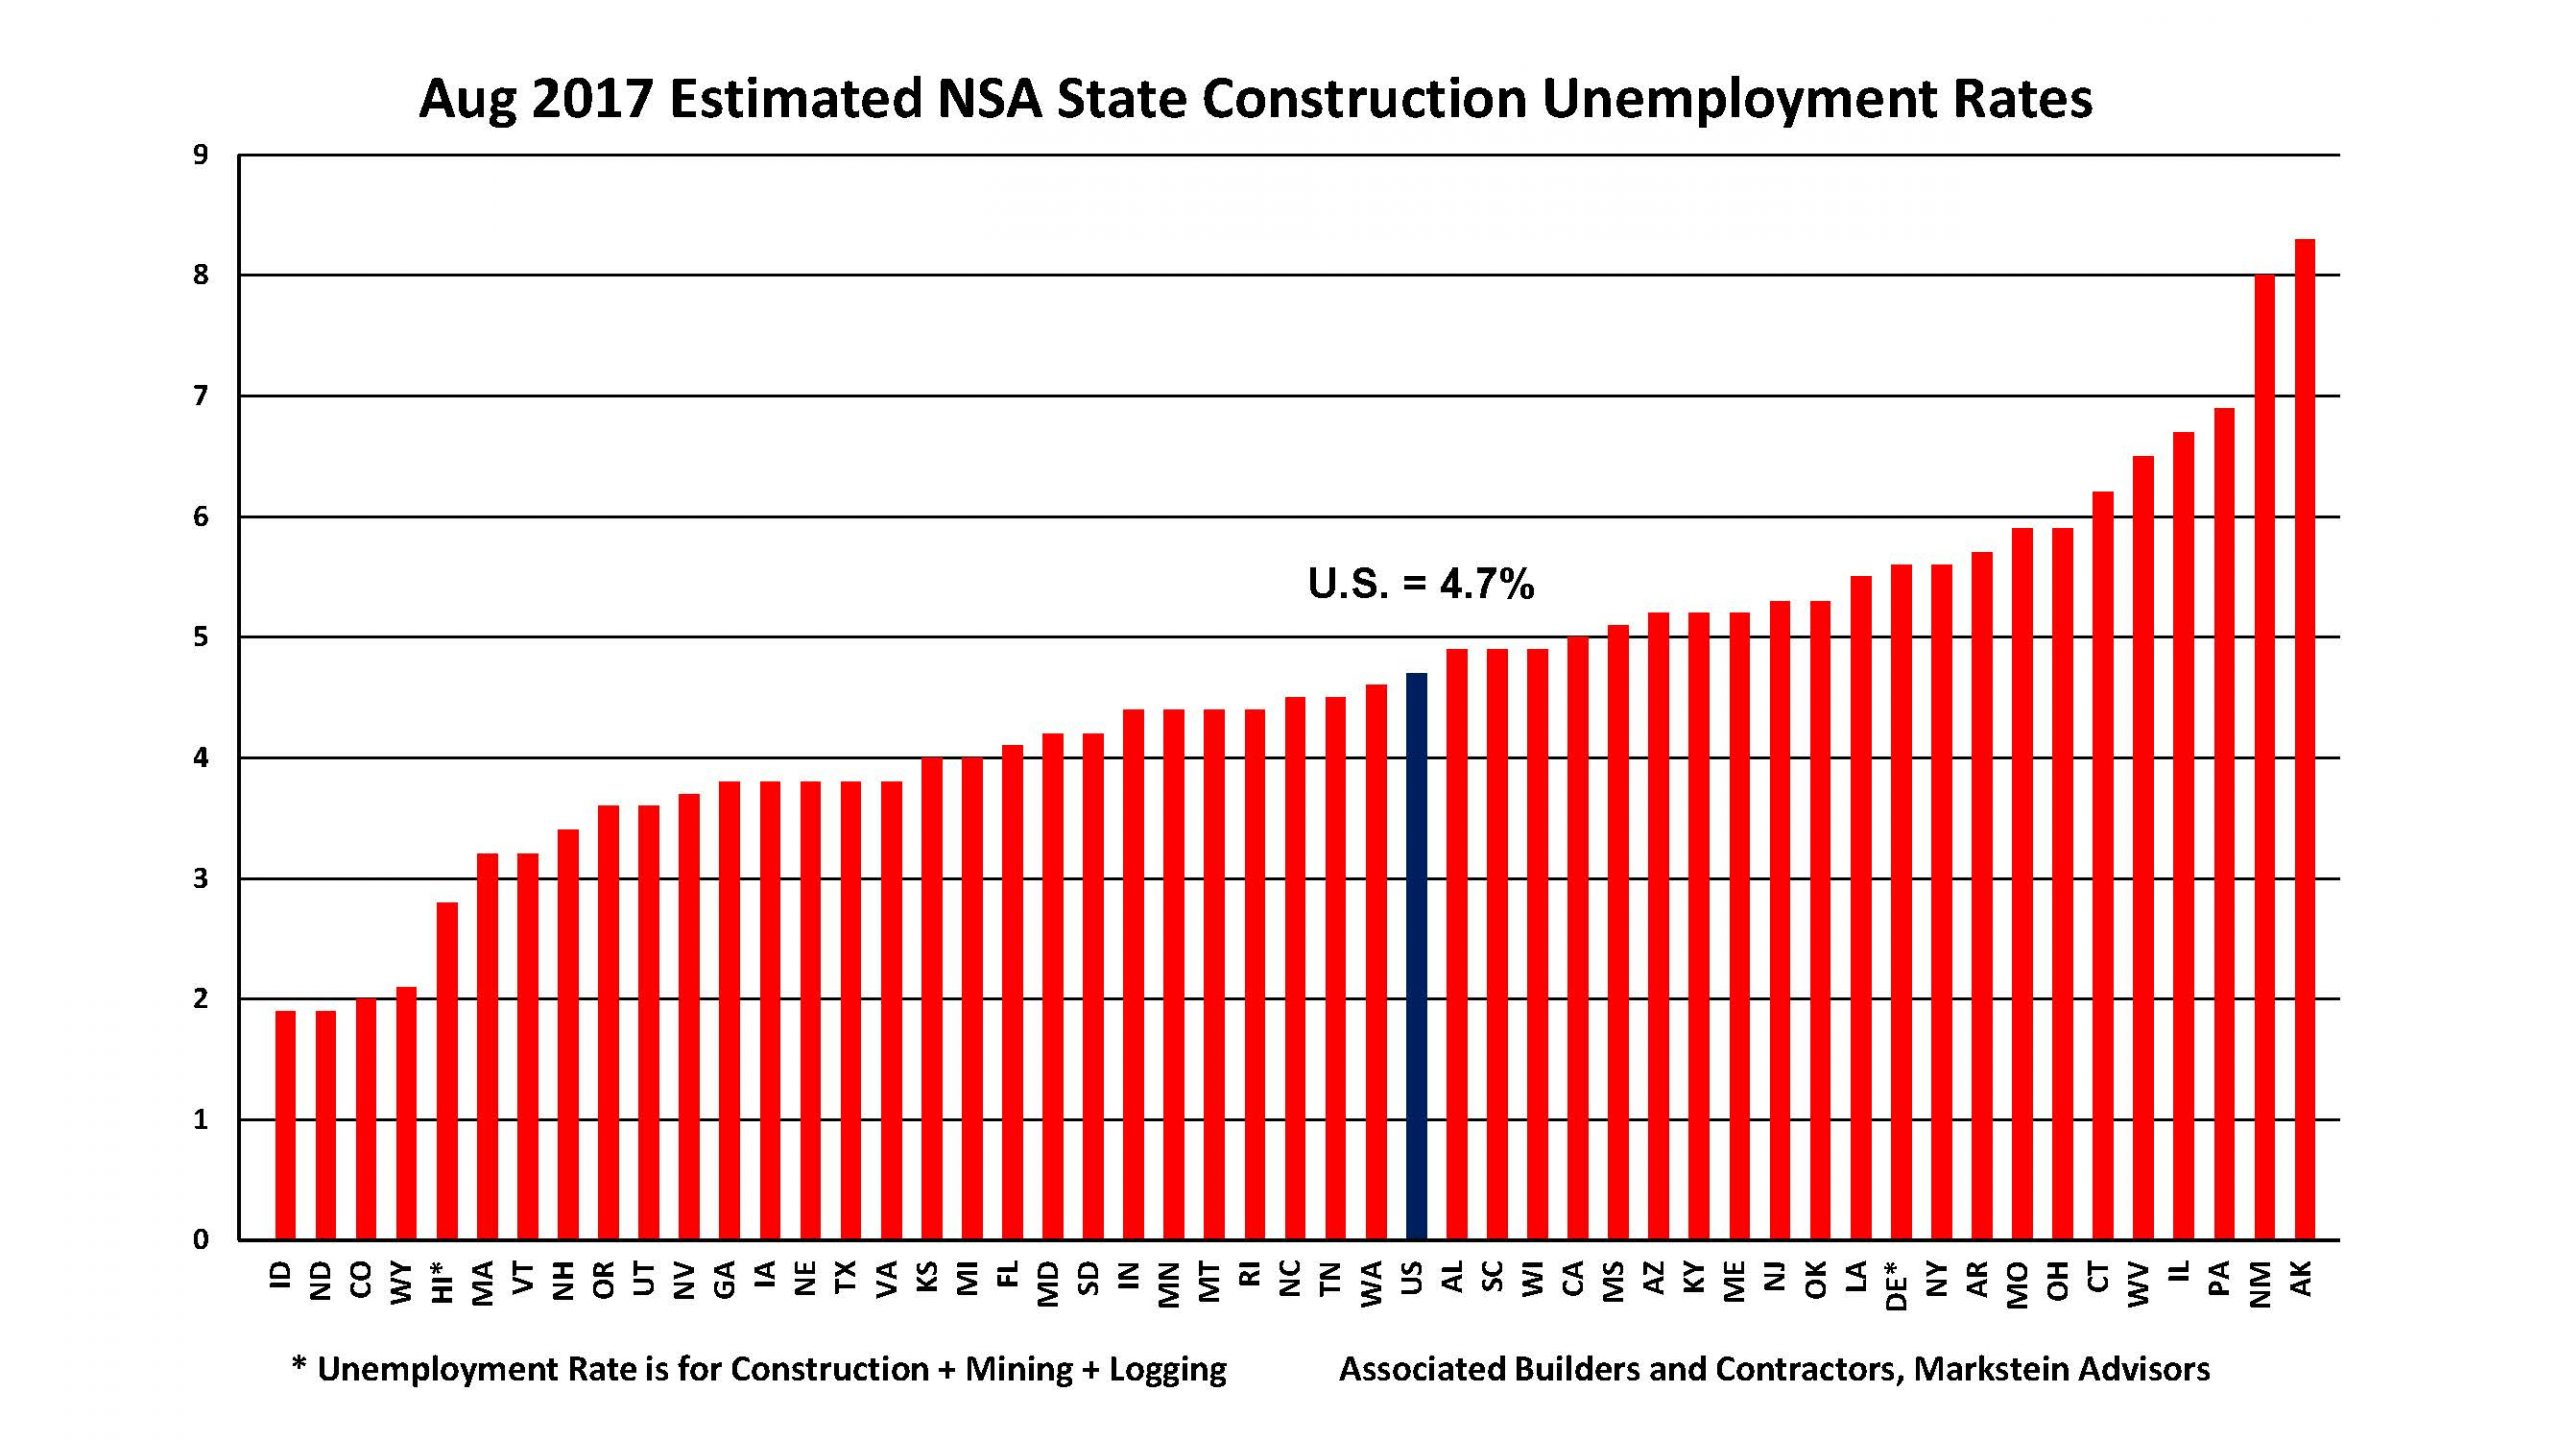 Construction Unemployment Improves in 35 States as Rate Falls to Lowest Ever for August